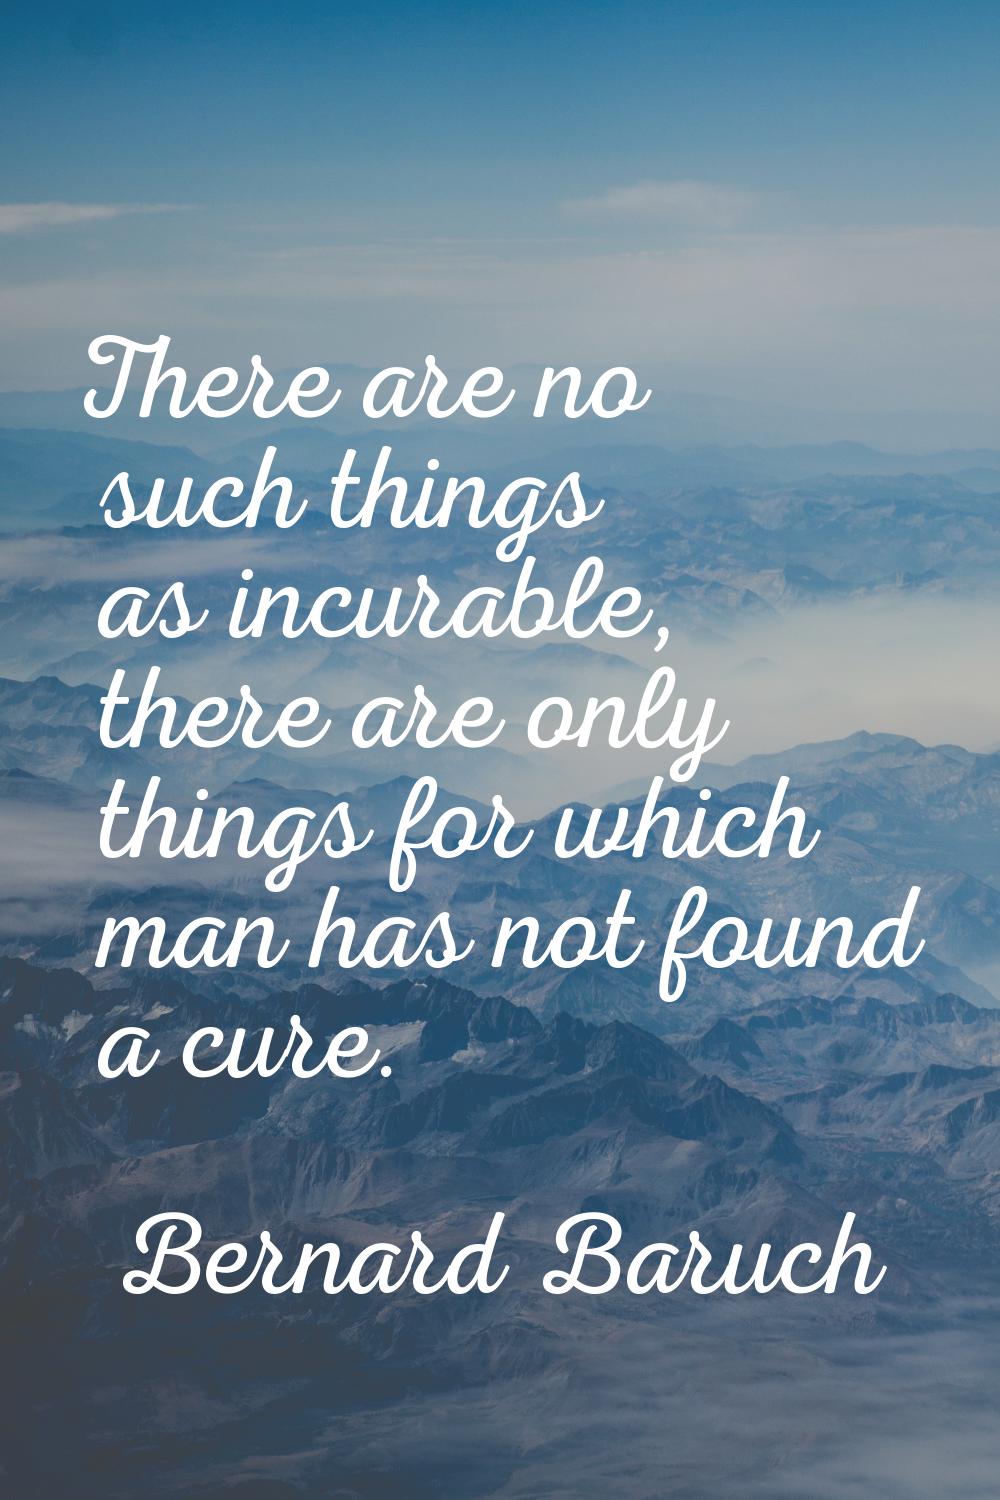 There are no such things as incurable, there are only things for which man has not found a cure.